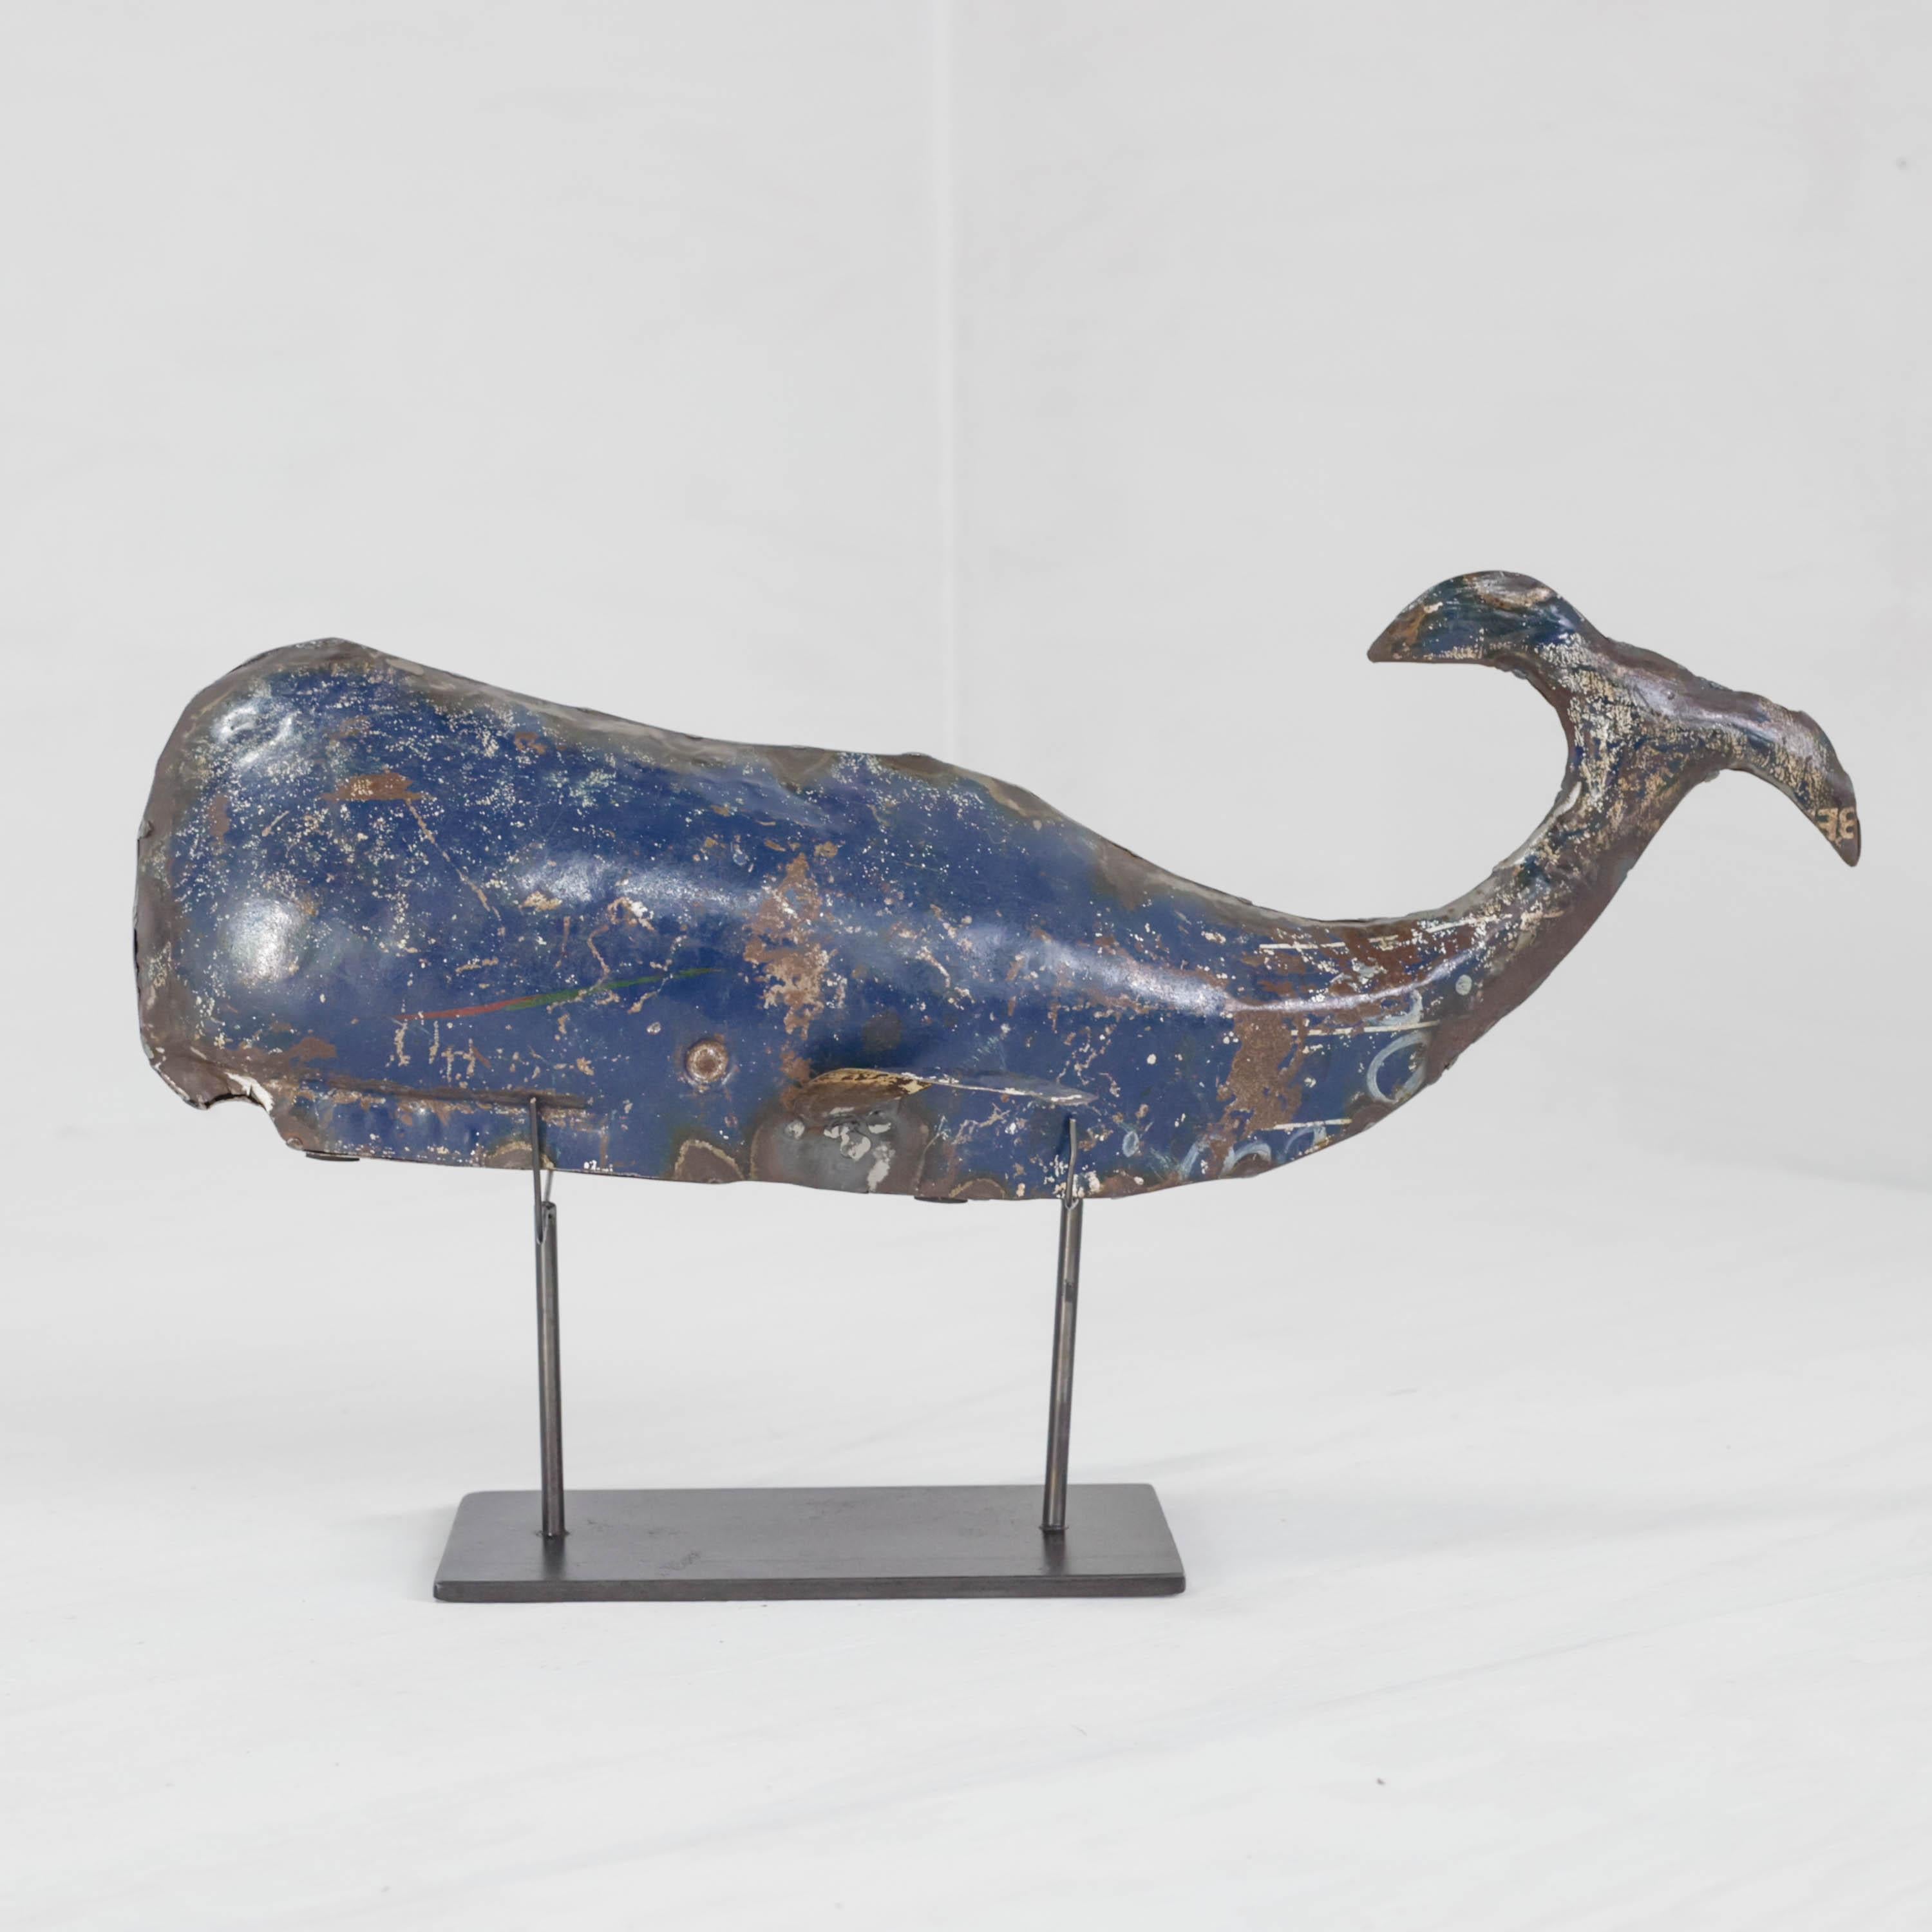 This midcentury folk art sculpture features a cobalt blue sperm whale rendered in soldered tin, with lines that are both strong and graceful rests atop a simple, sturdy black steel base. 

Scrap tin was used in the creation of this one-of-a-kind